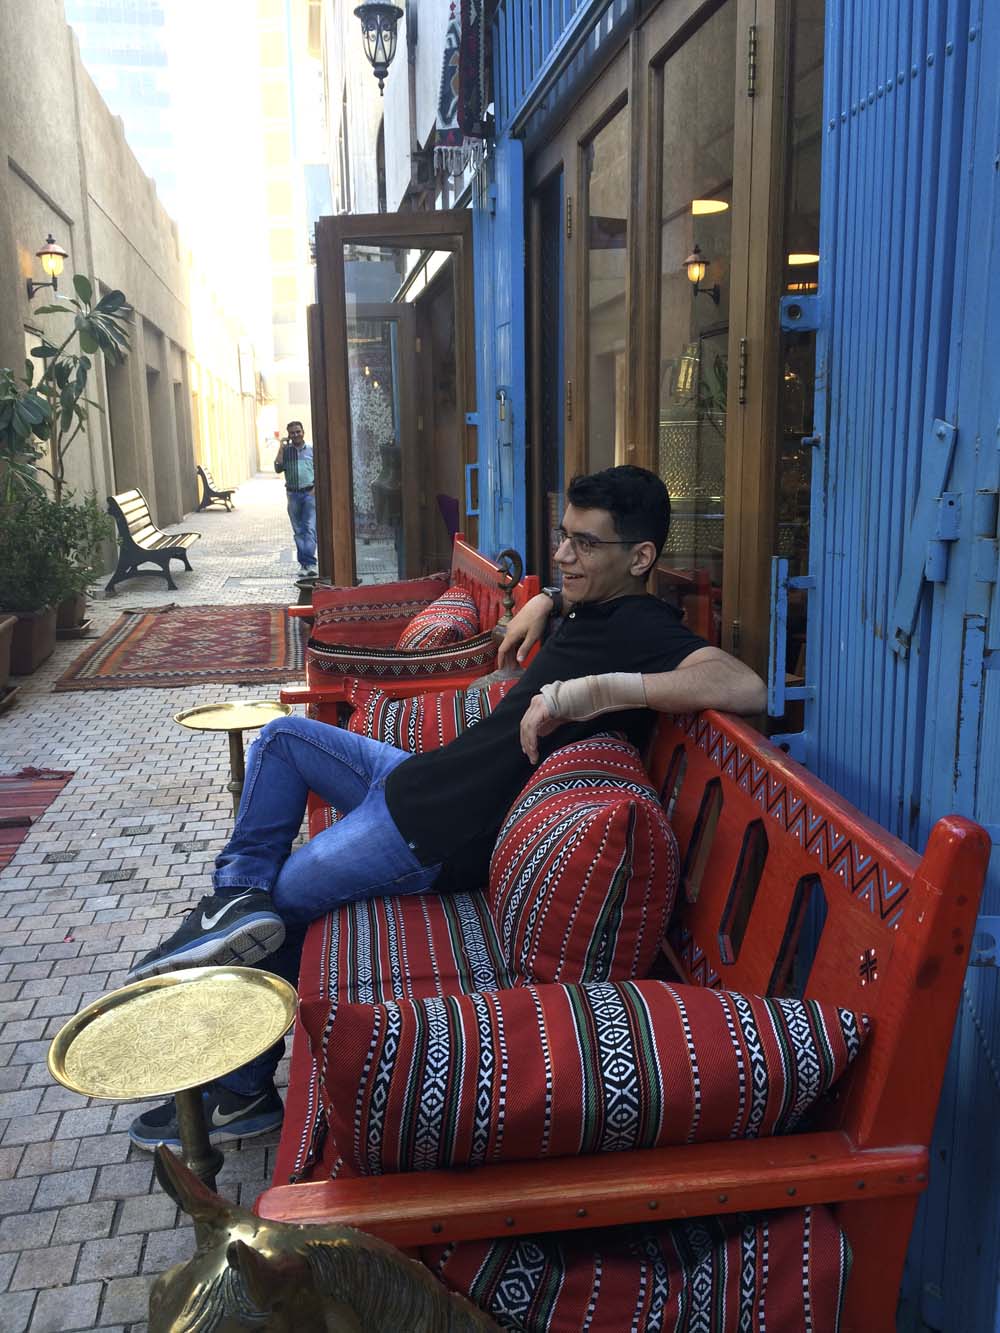 while yousef sits on a more practical bench with traditional sadu cushions